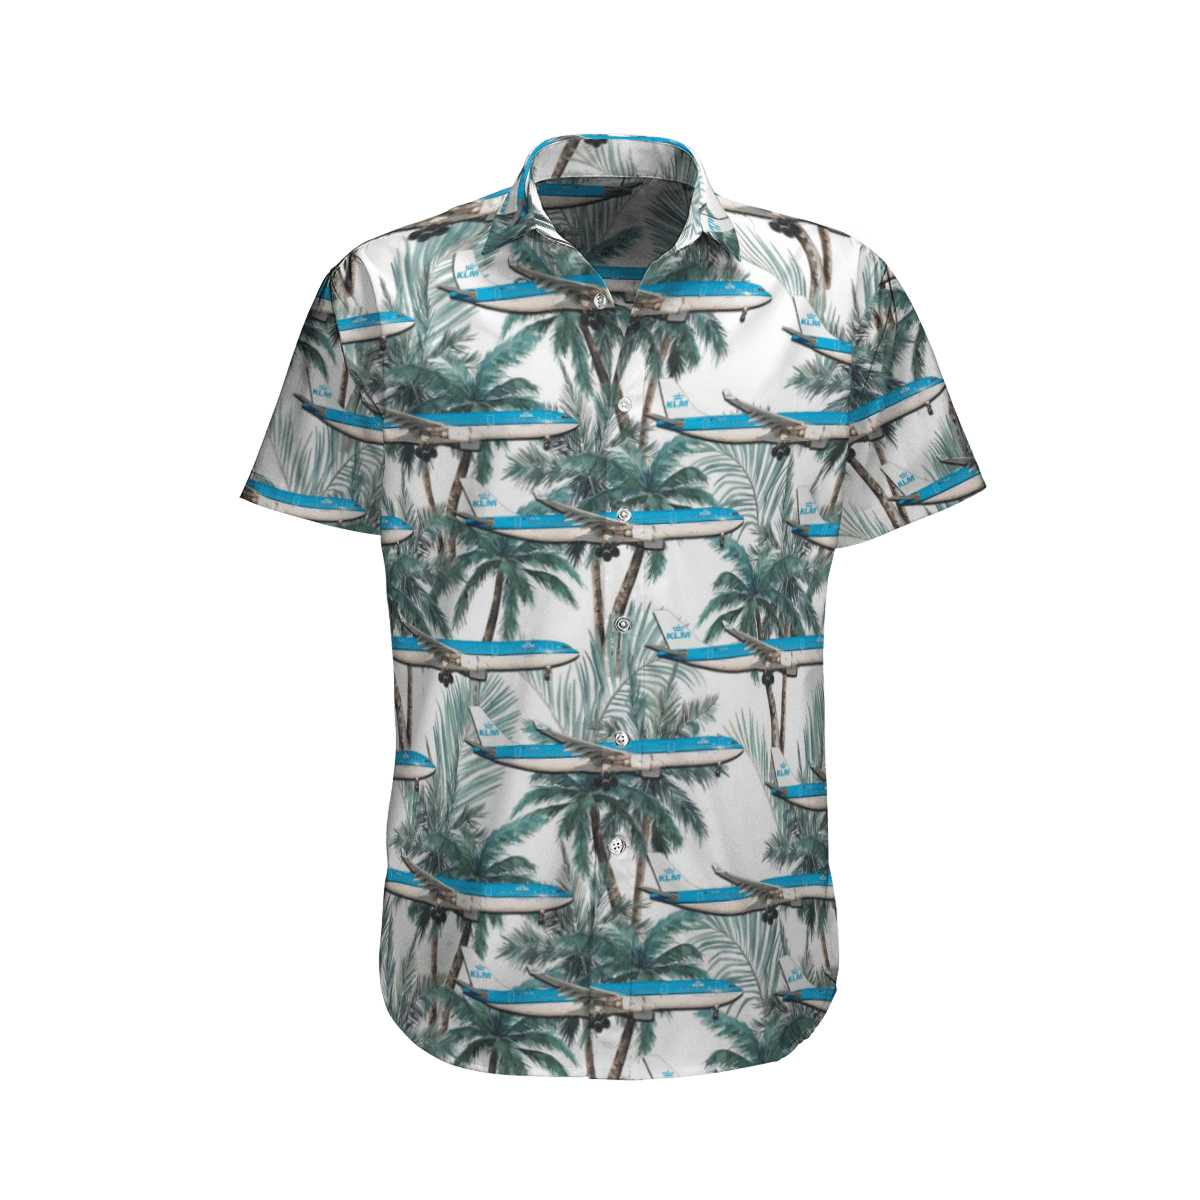 HOT KLM Royal Dutch Airlines Airbus A330-303 All Over Print Tropical Shirt2